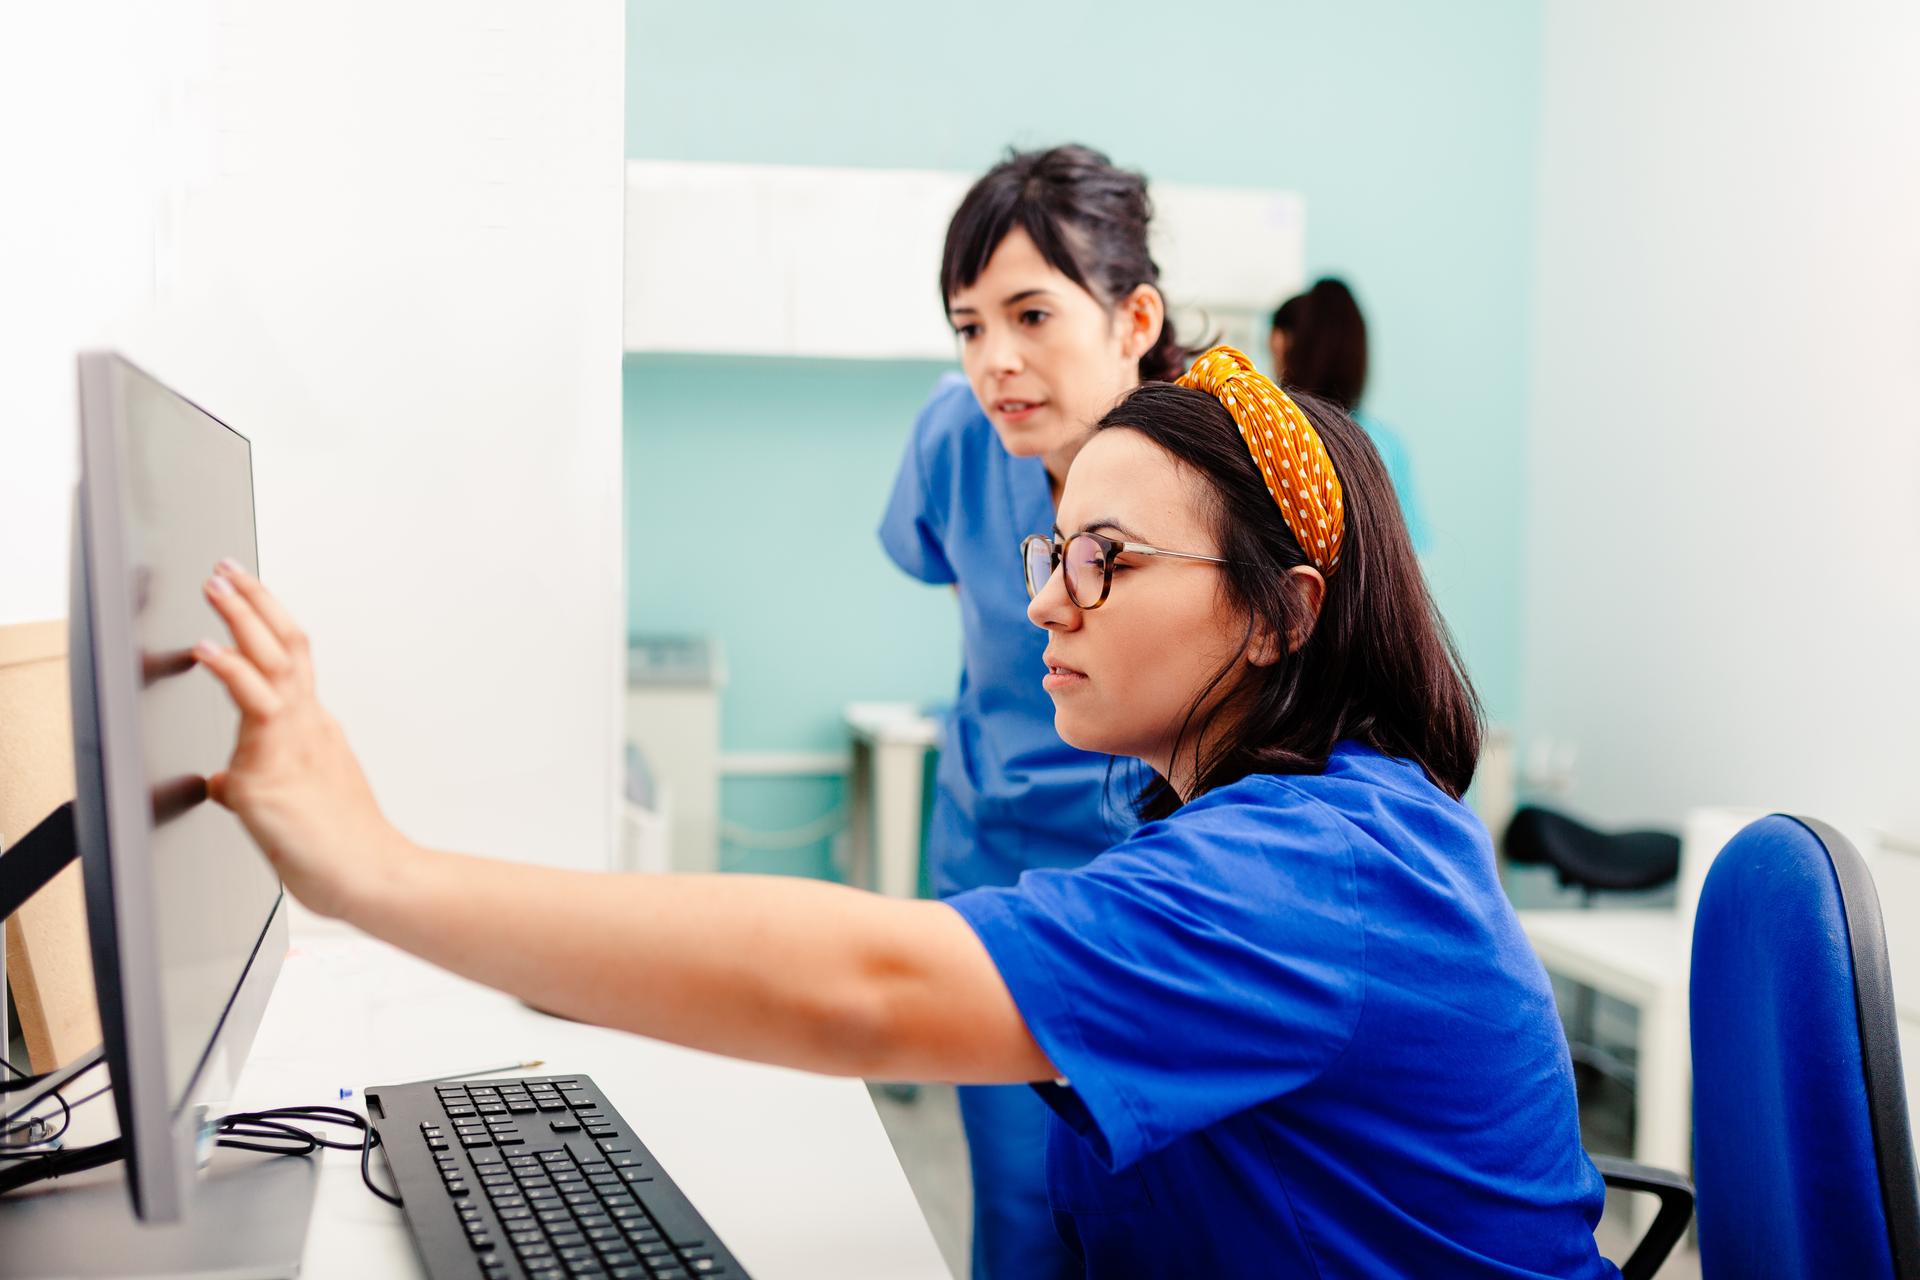 Nurse wearing orange headband and blue scrubs shows colleague how to use EHR